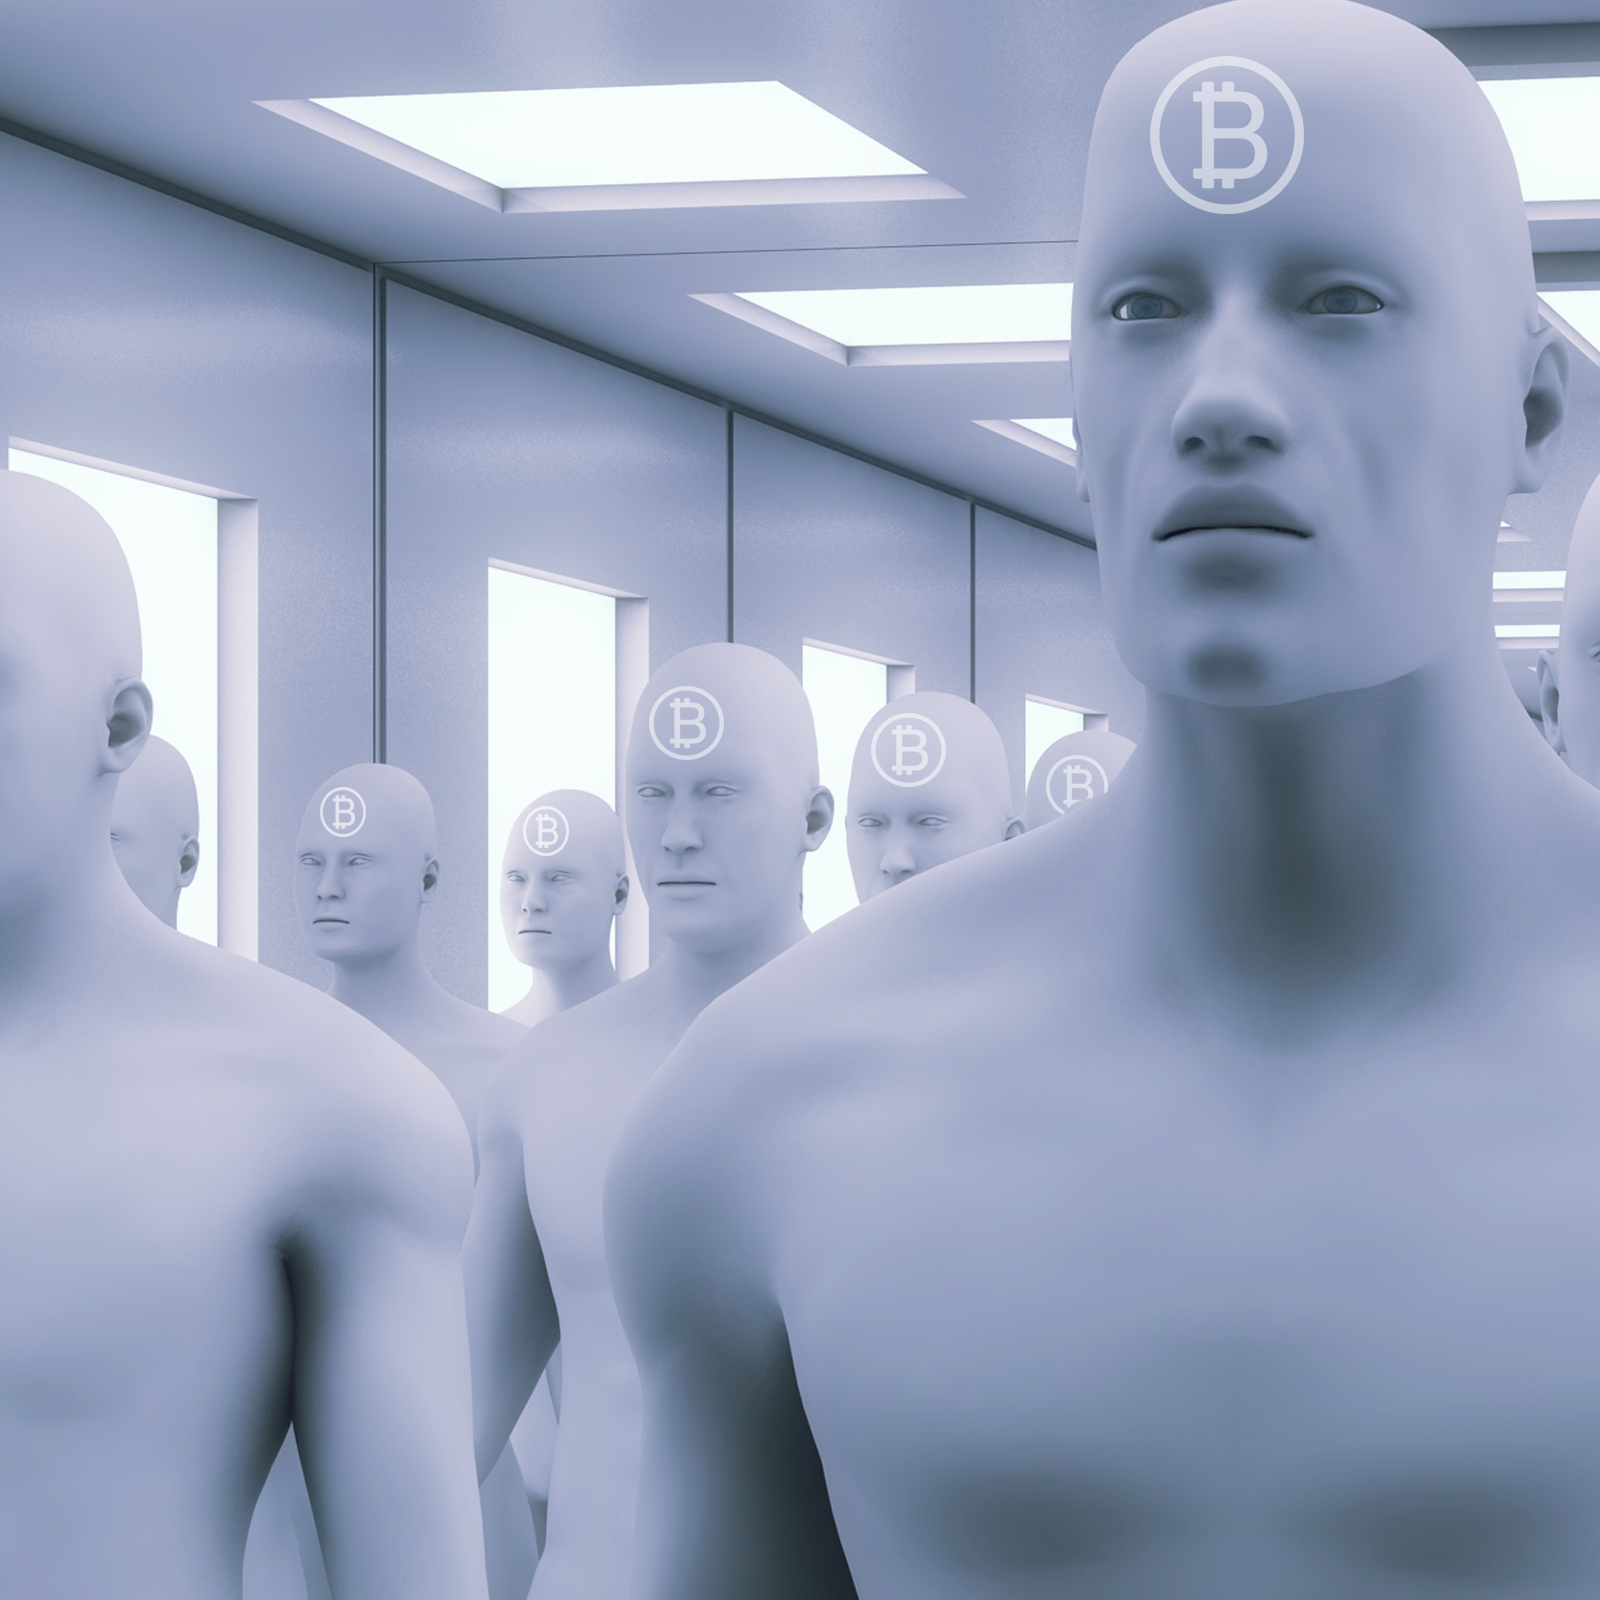 The Marketing Ploys of Clones: Another Project Aims to Create a 'Perfect Bitcoin'